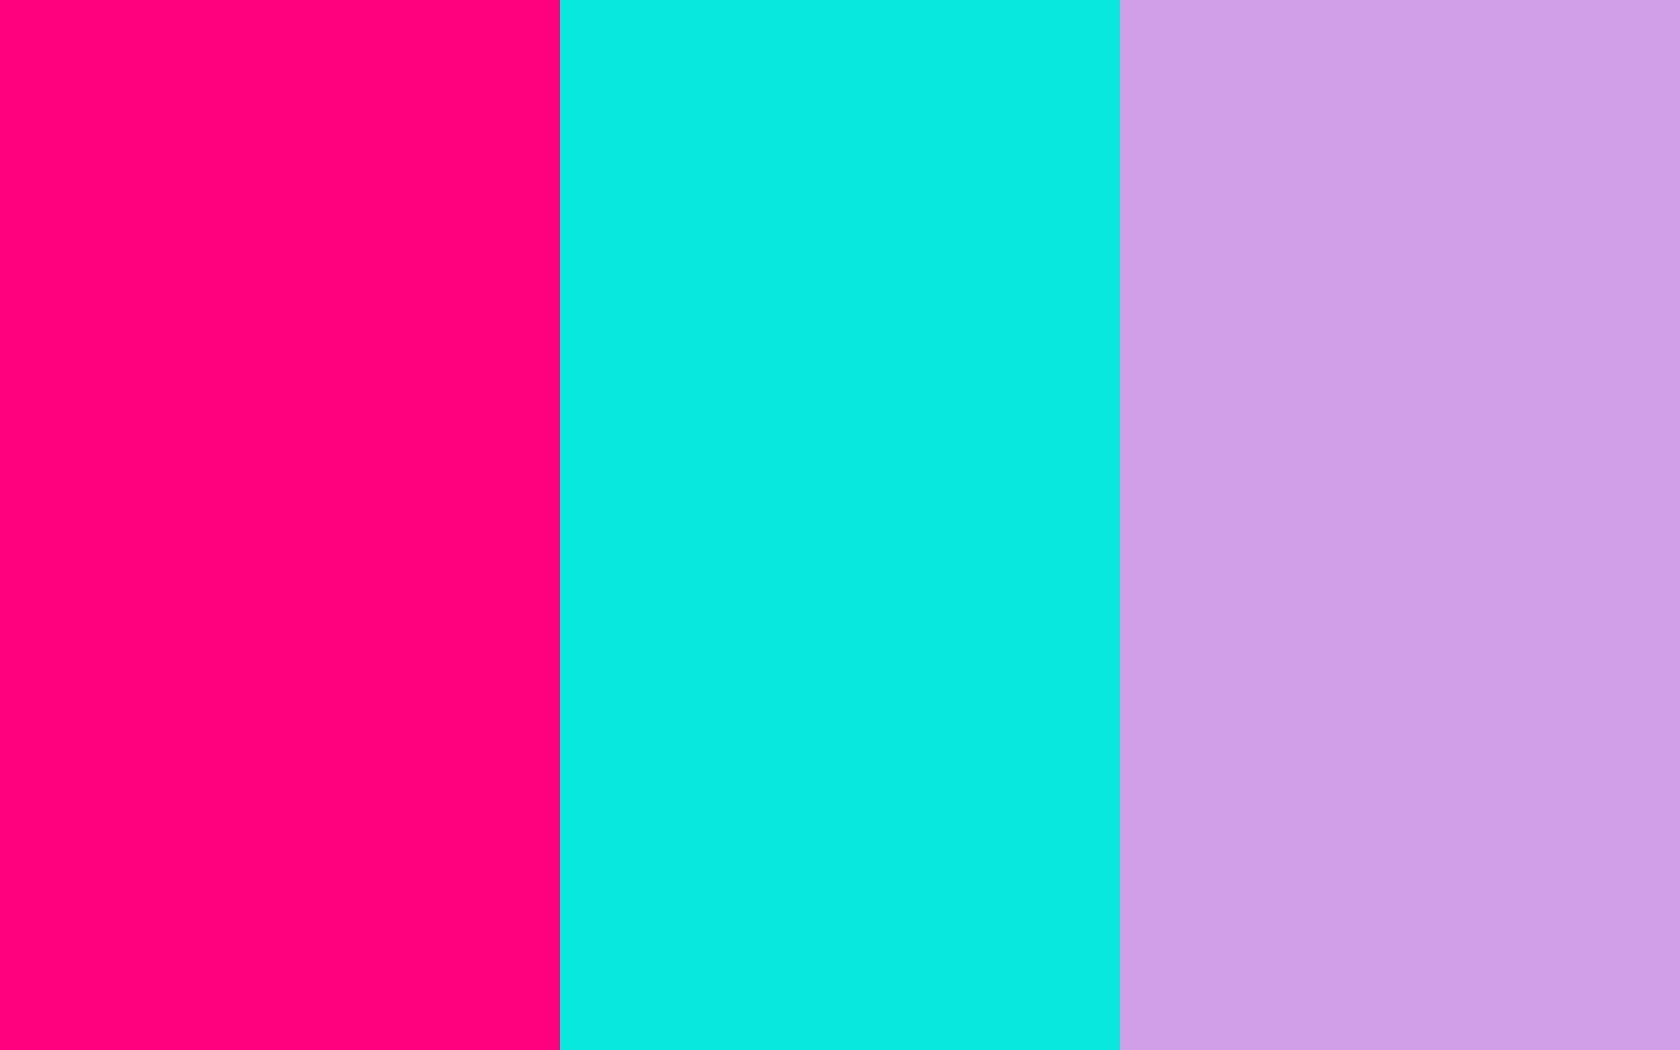 1680x1050-bright-pink-bright-turquoise-bright-ube-three-color-background.jpg